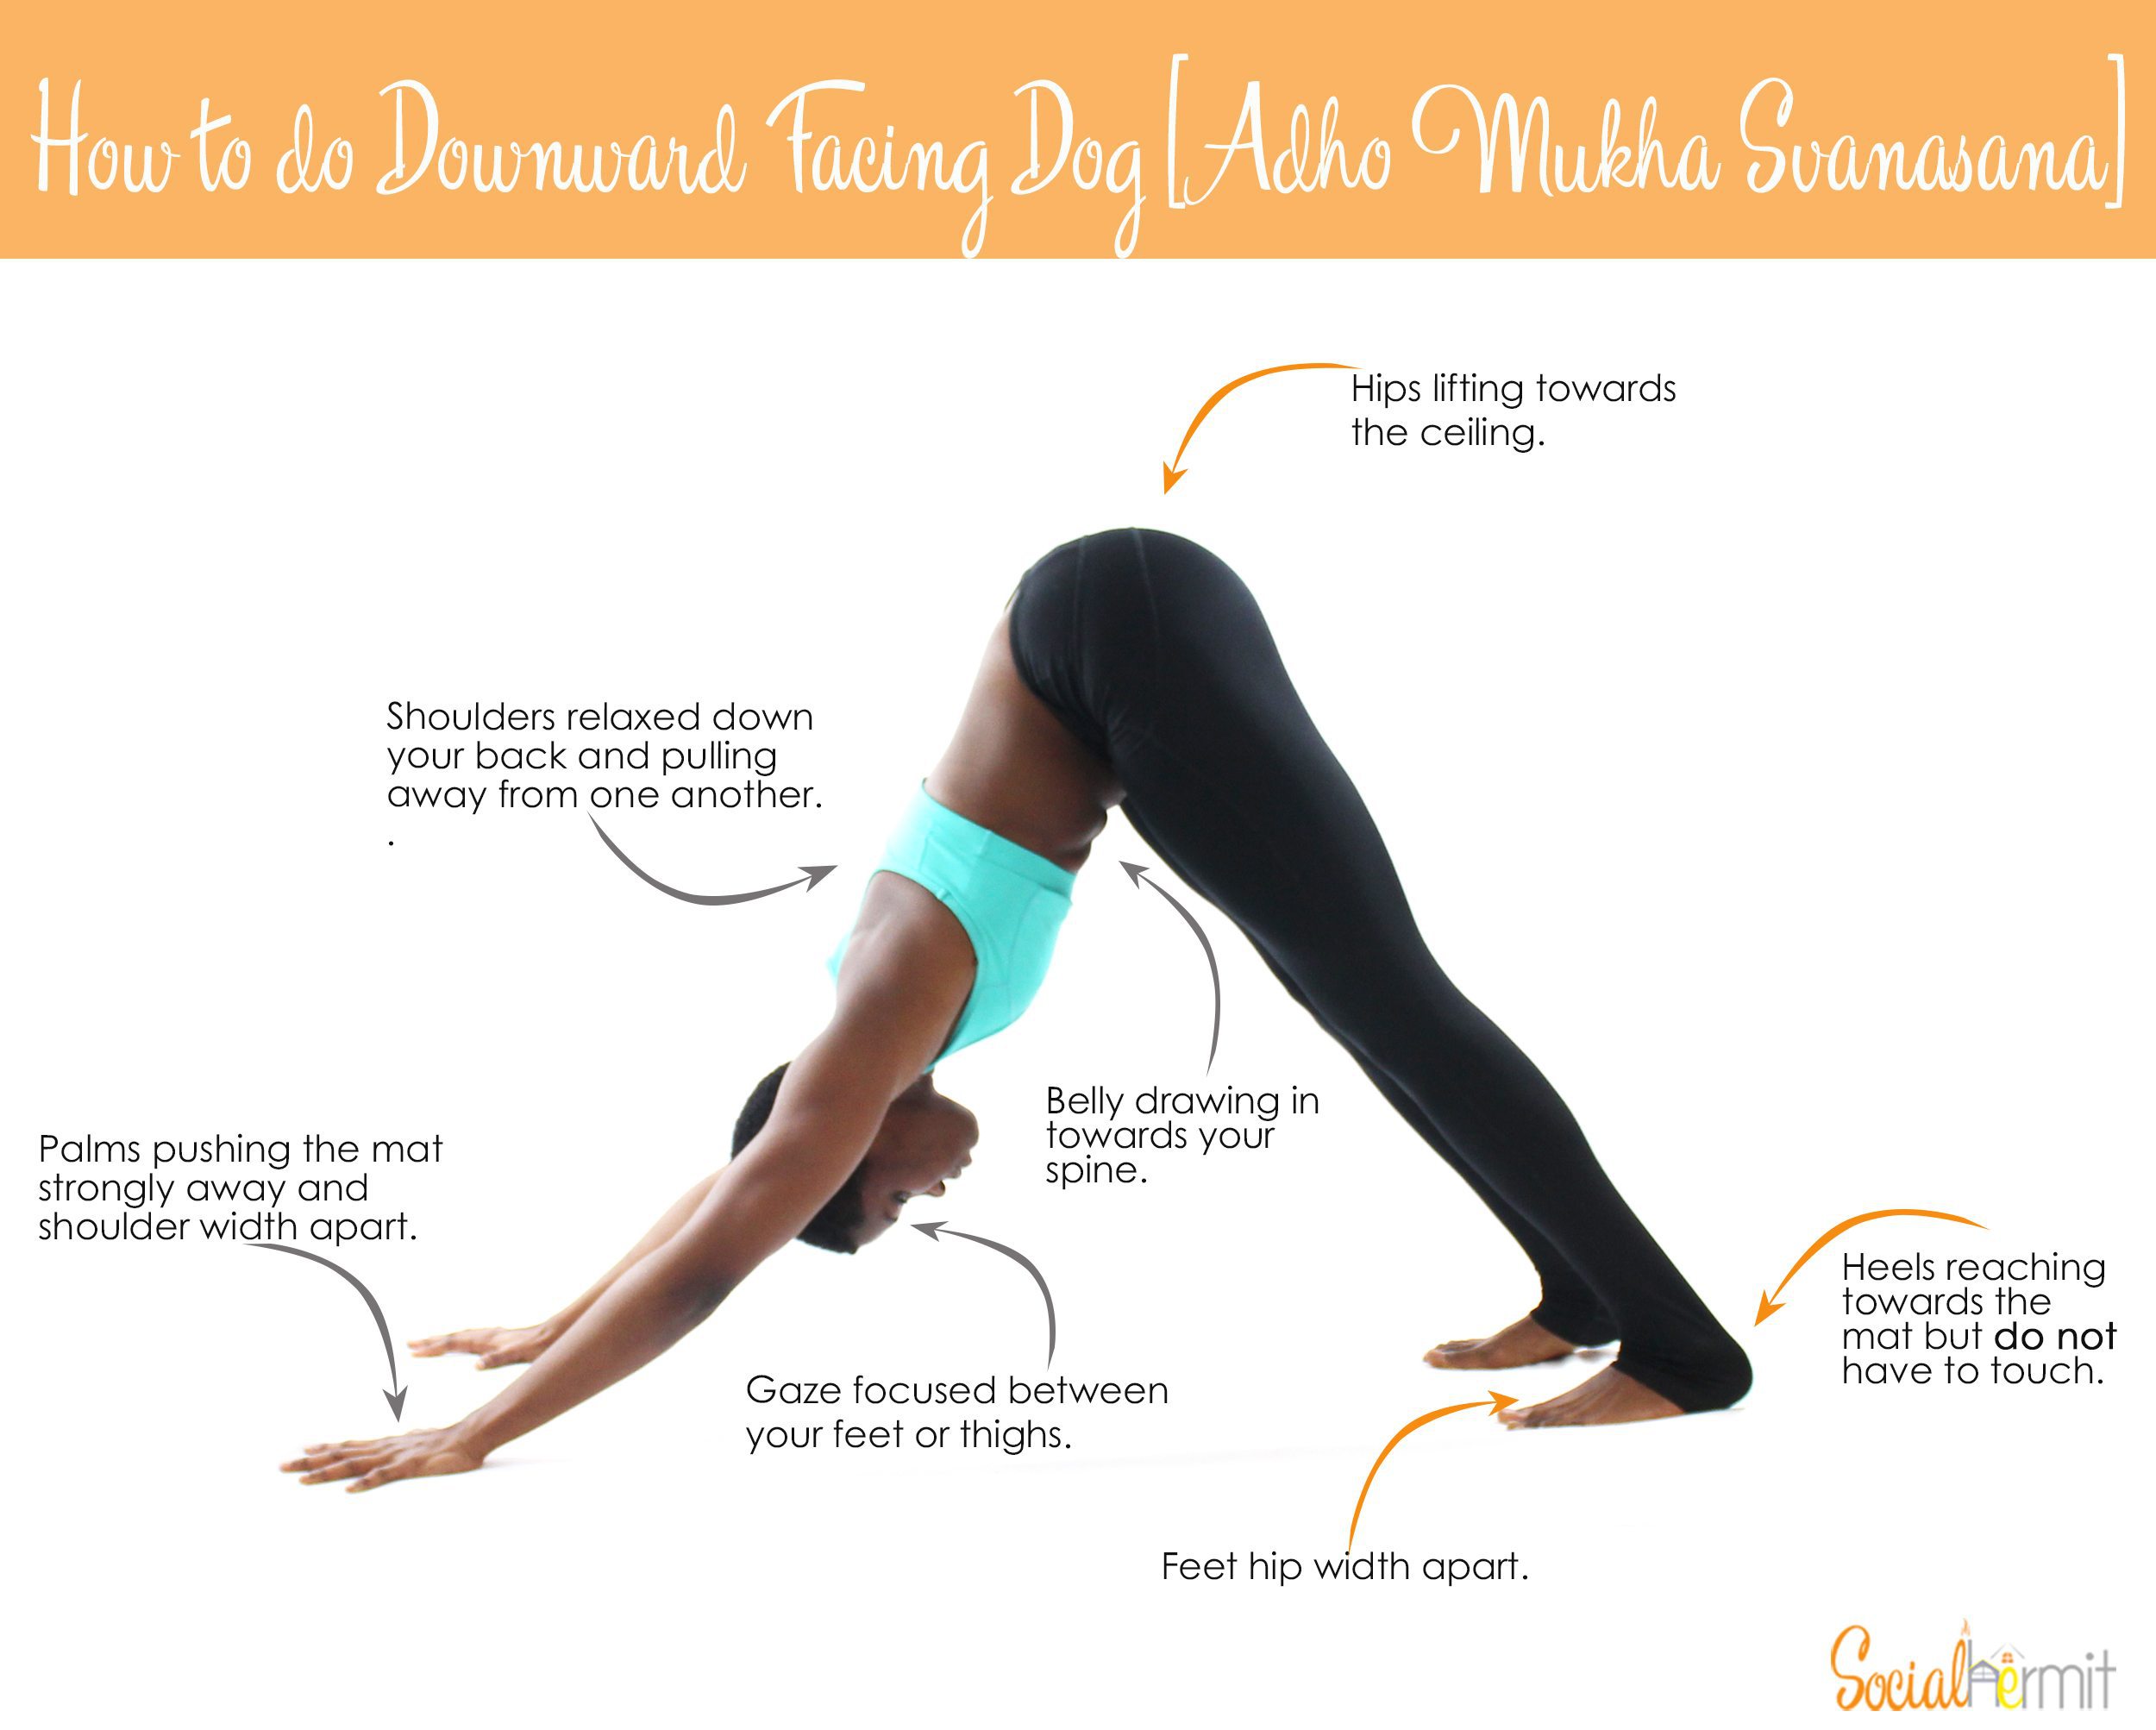 How to do Downward Facing Dog - Social Hermit